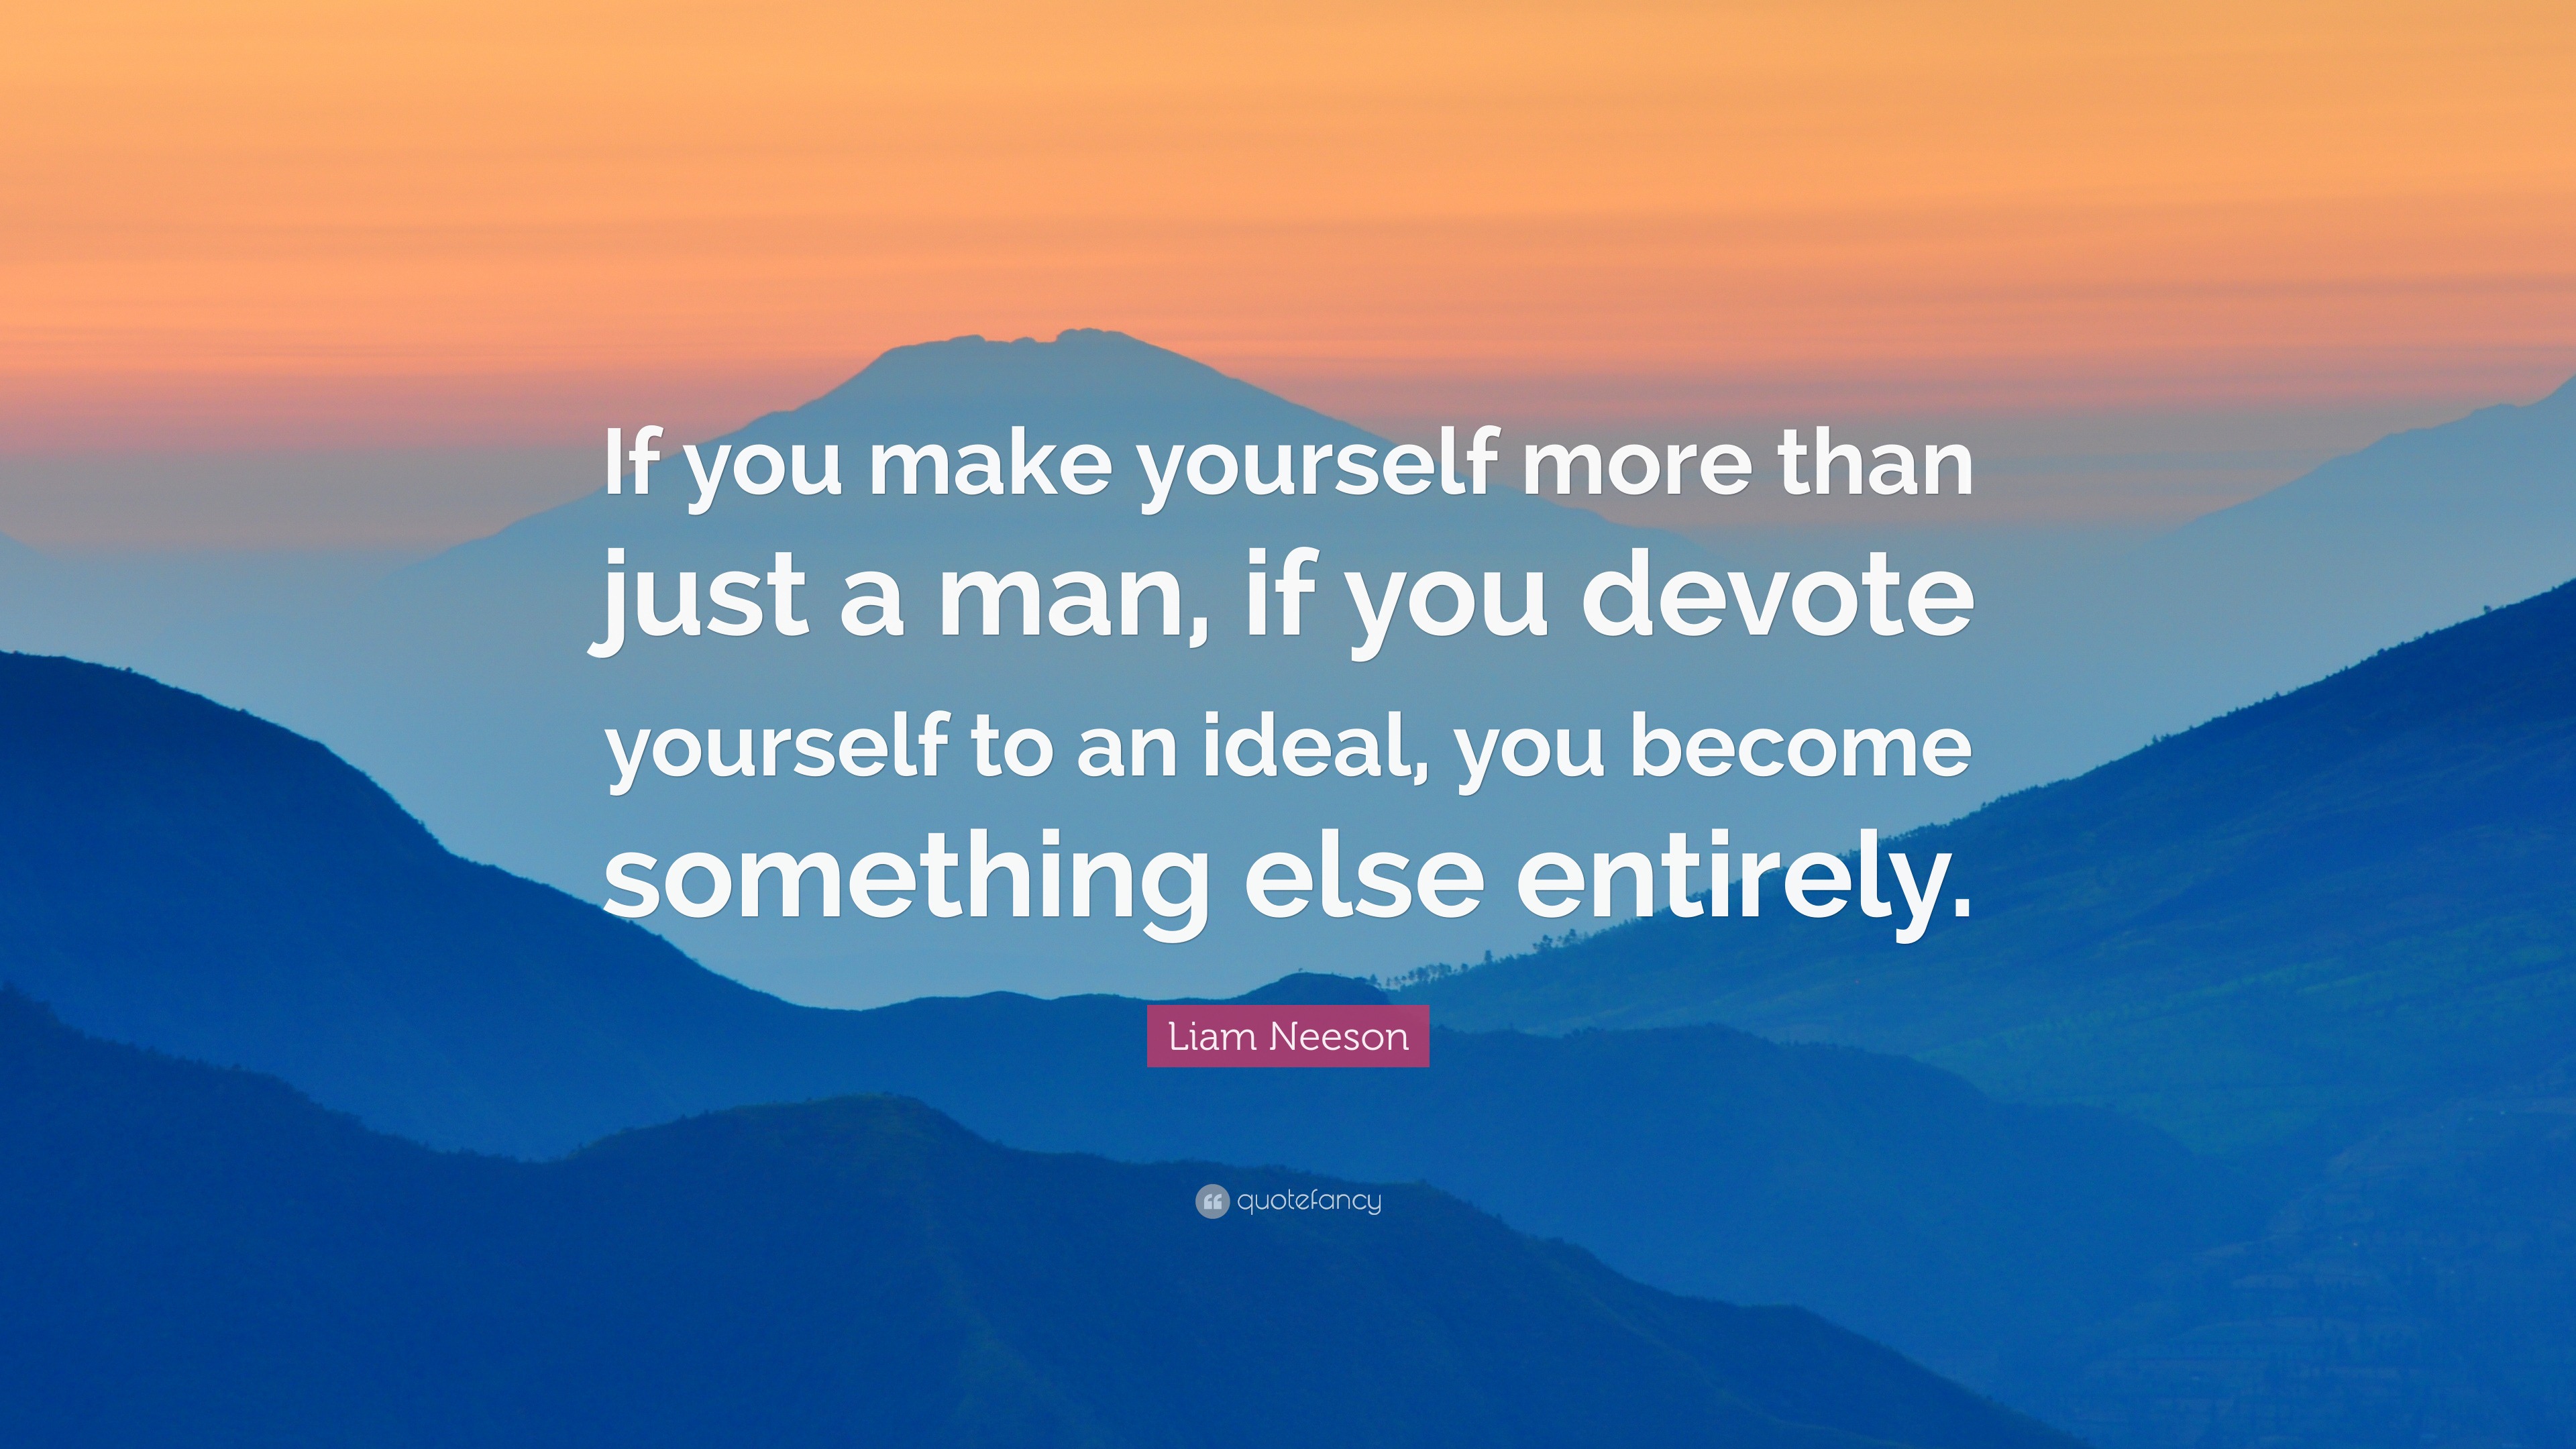 Liam Neeson Quote: “If you make yourself more than just a man, if you ...